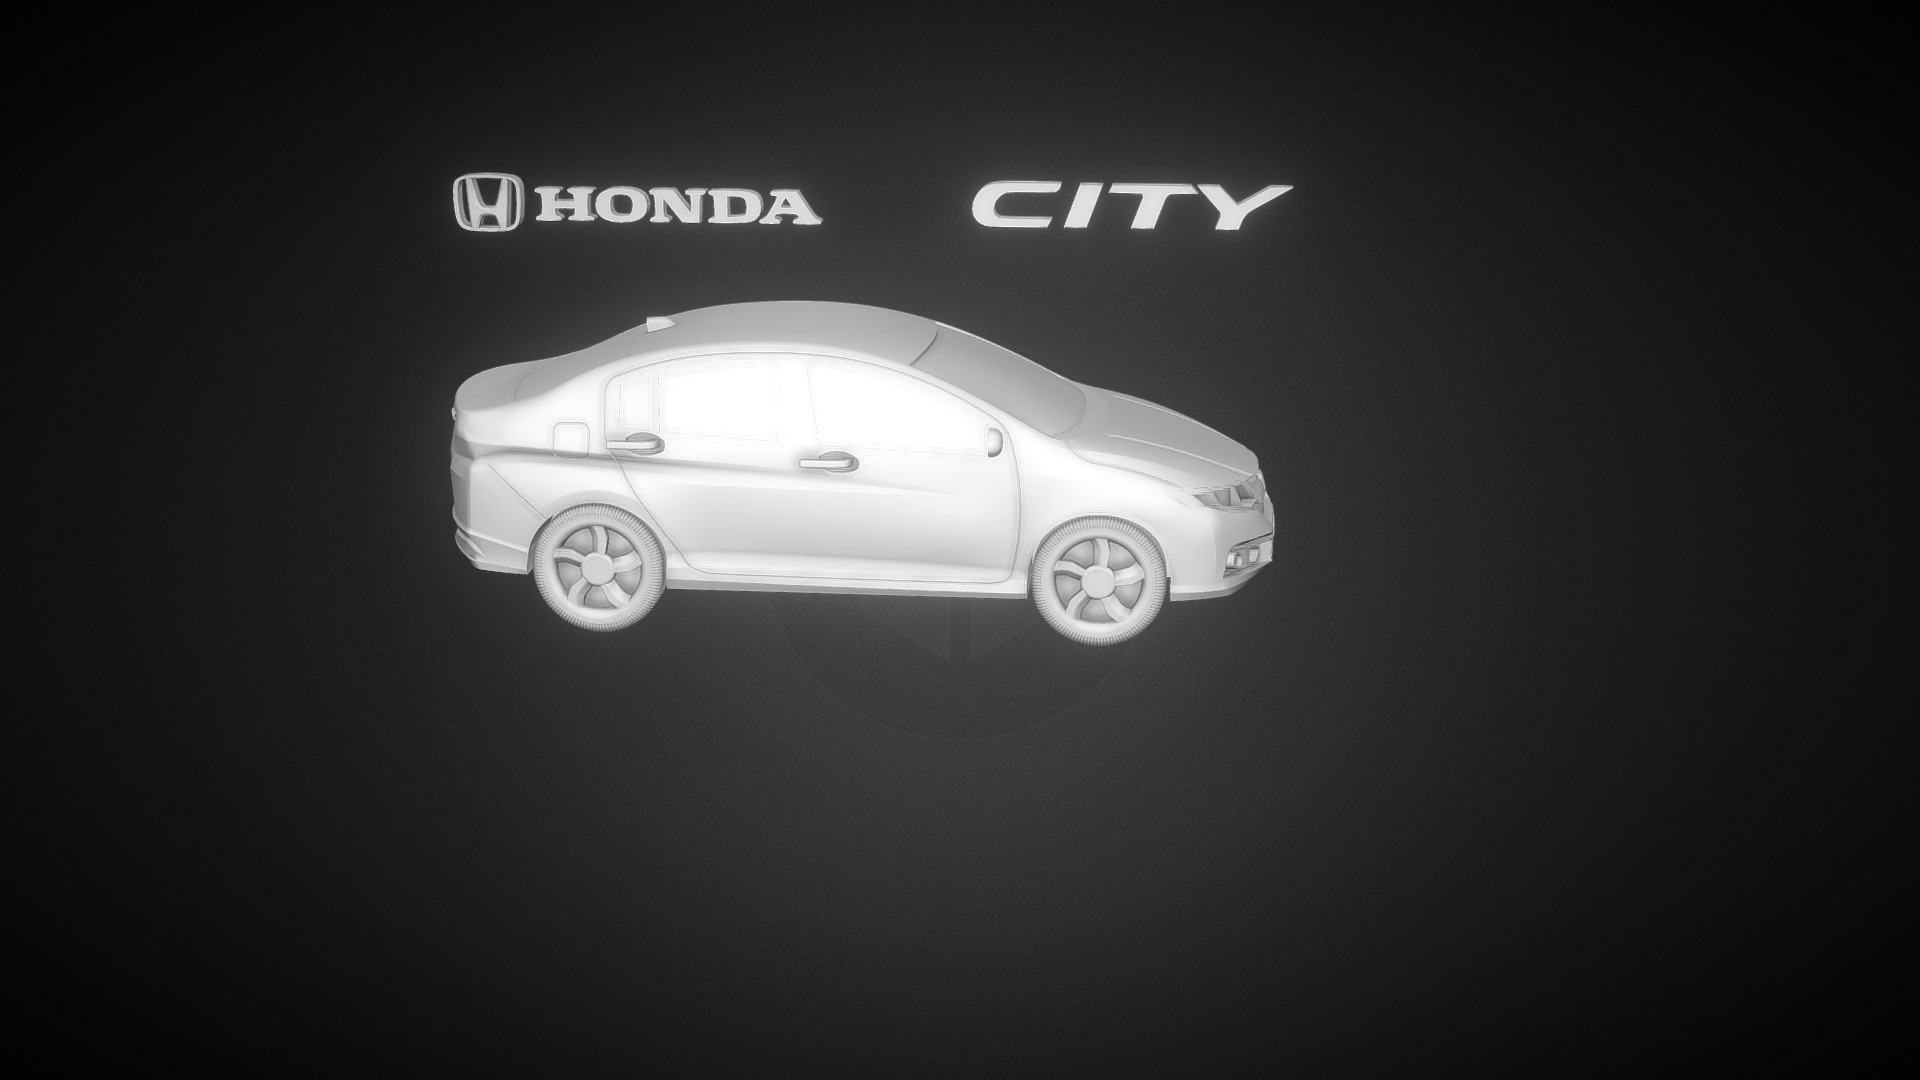 3D model Honda city 3D file - This is a 3D model of the Honda city 3D file. The 3D model is about a car on a black background.